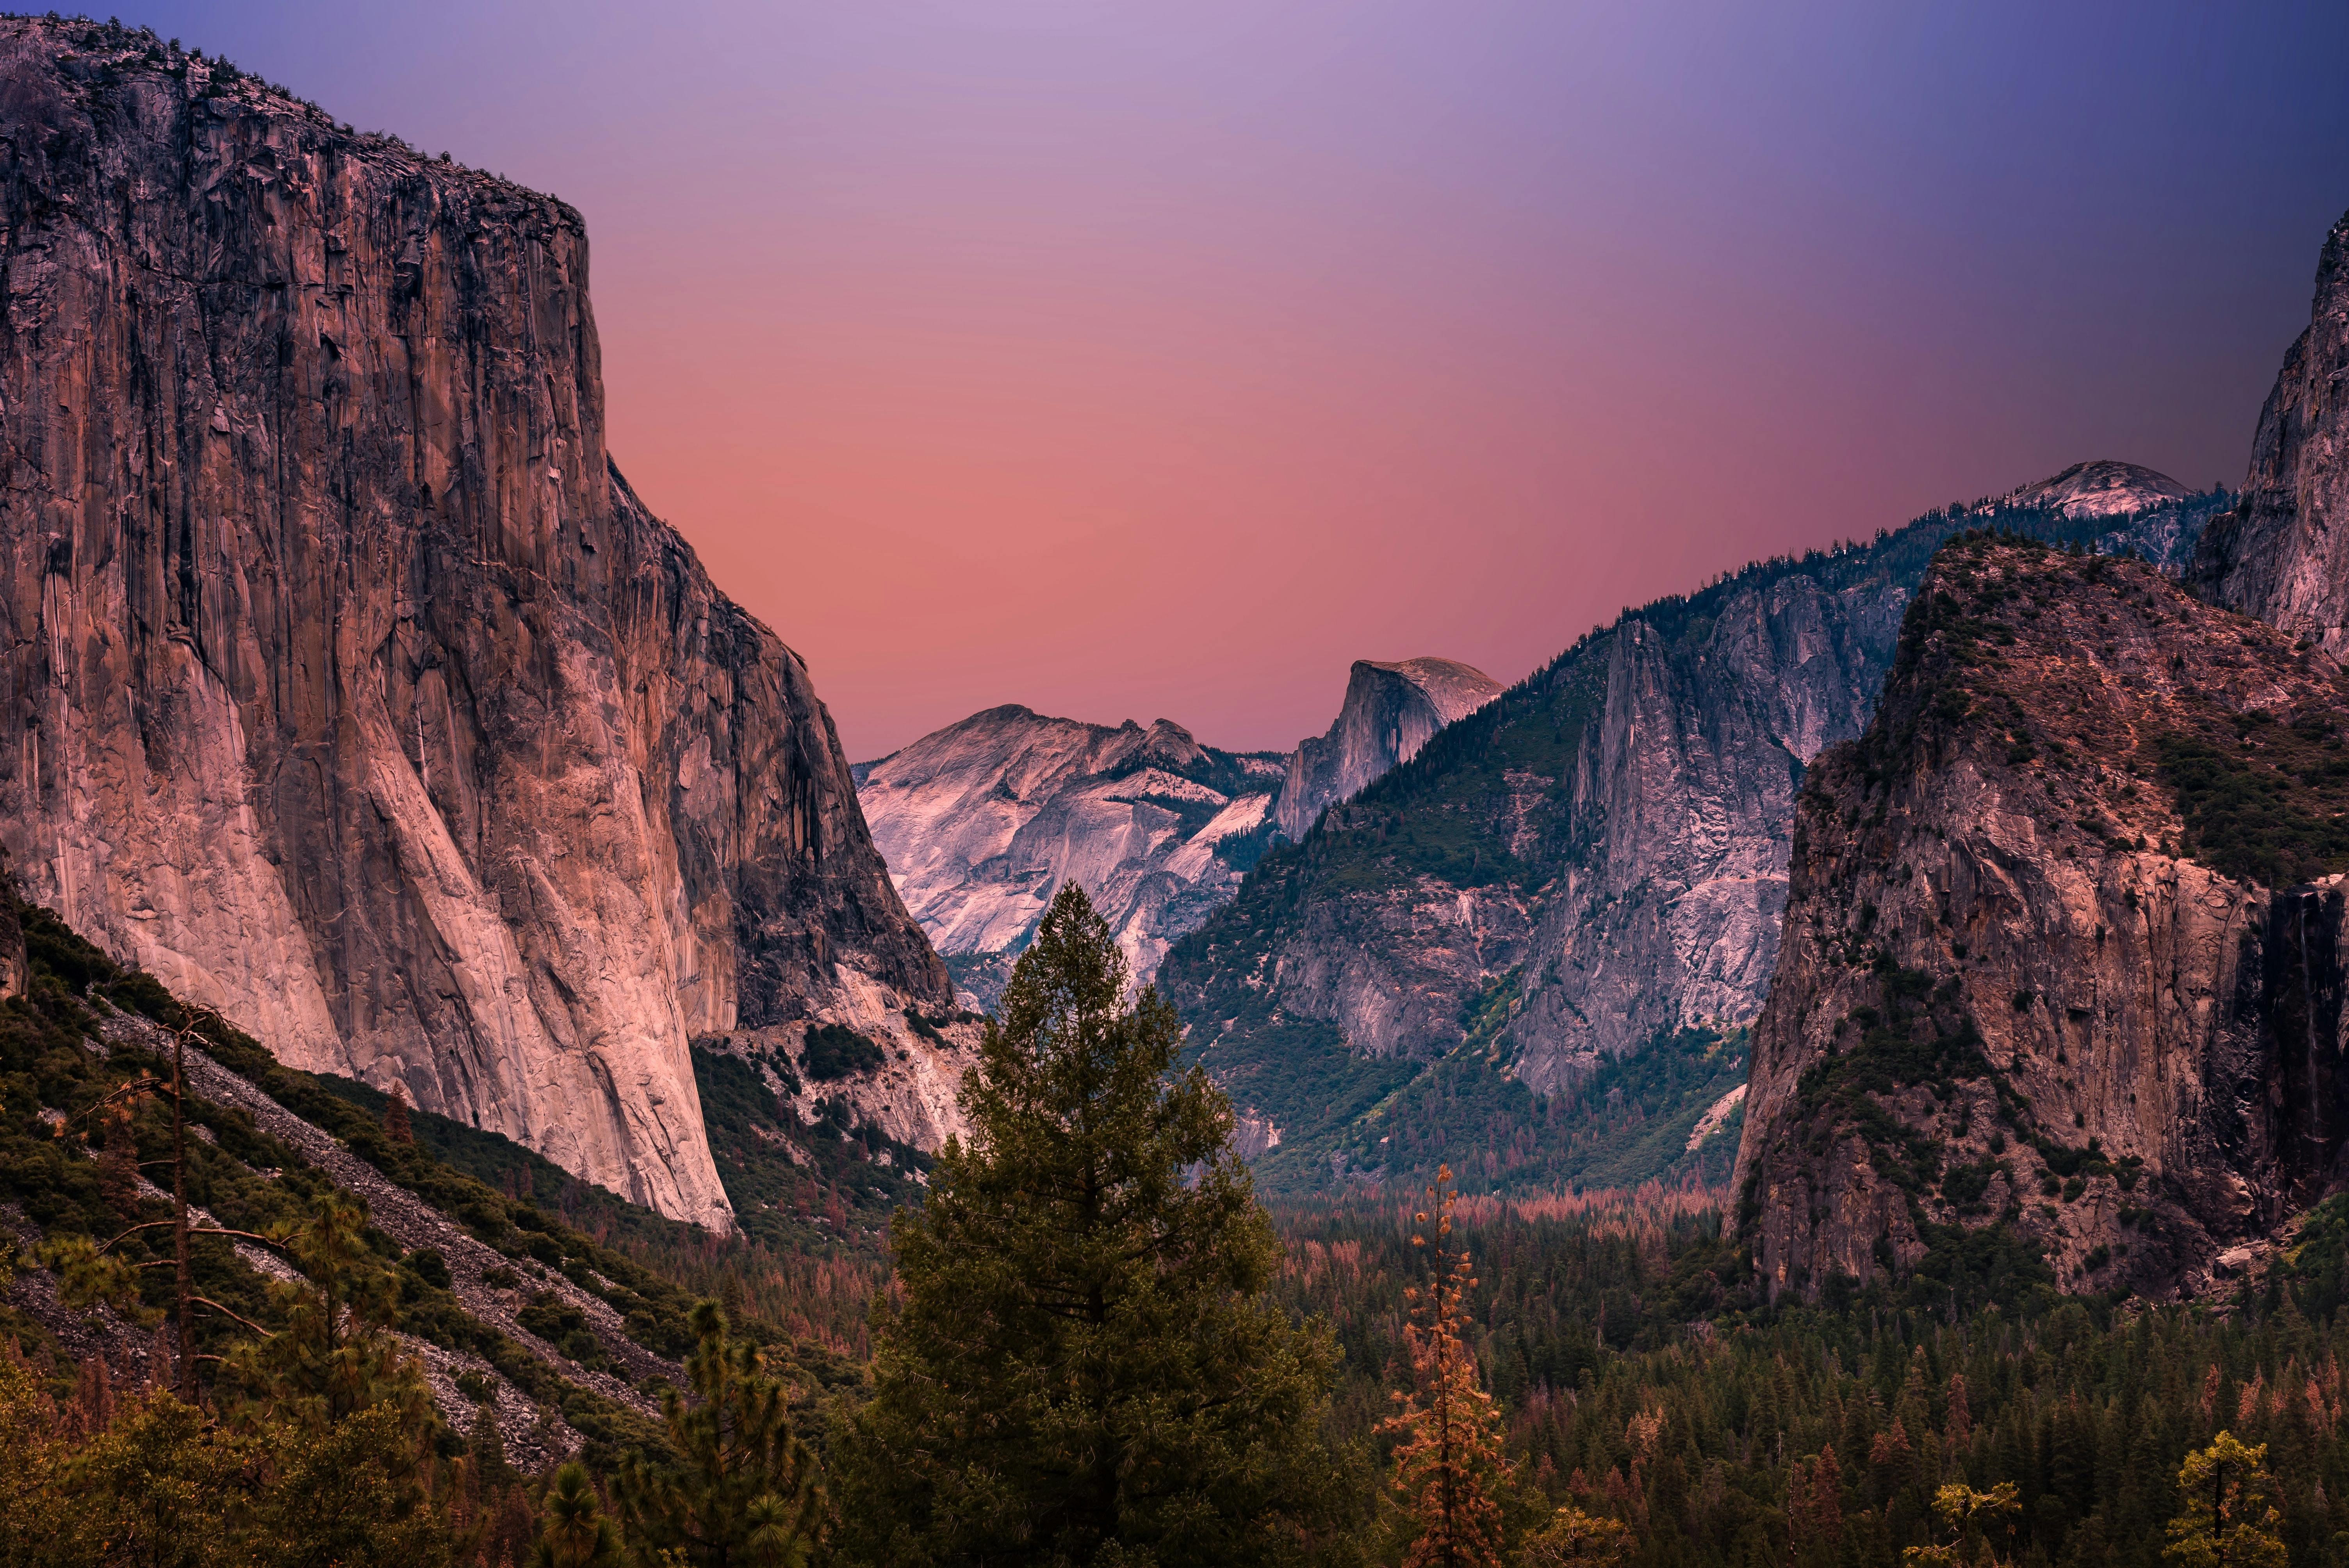 A sunset view of Yosemite National Park from the iconic Tunnel View viewpoint. 